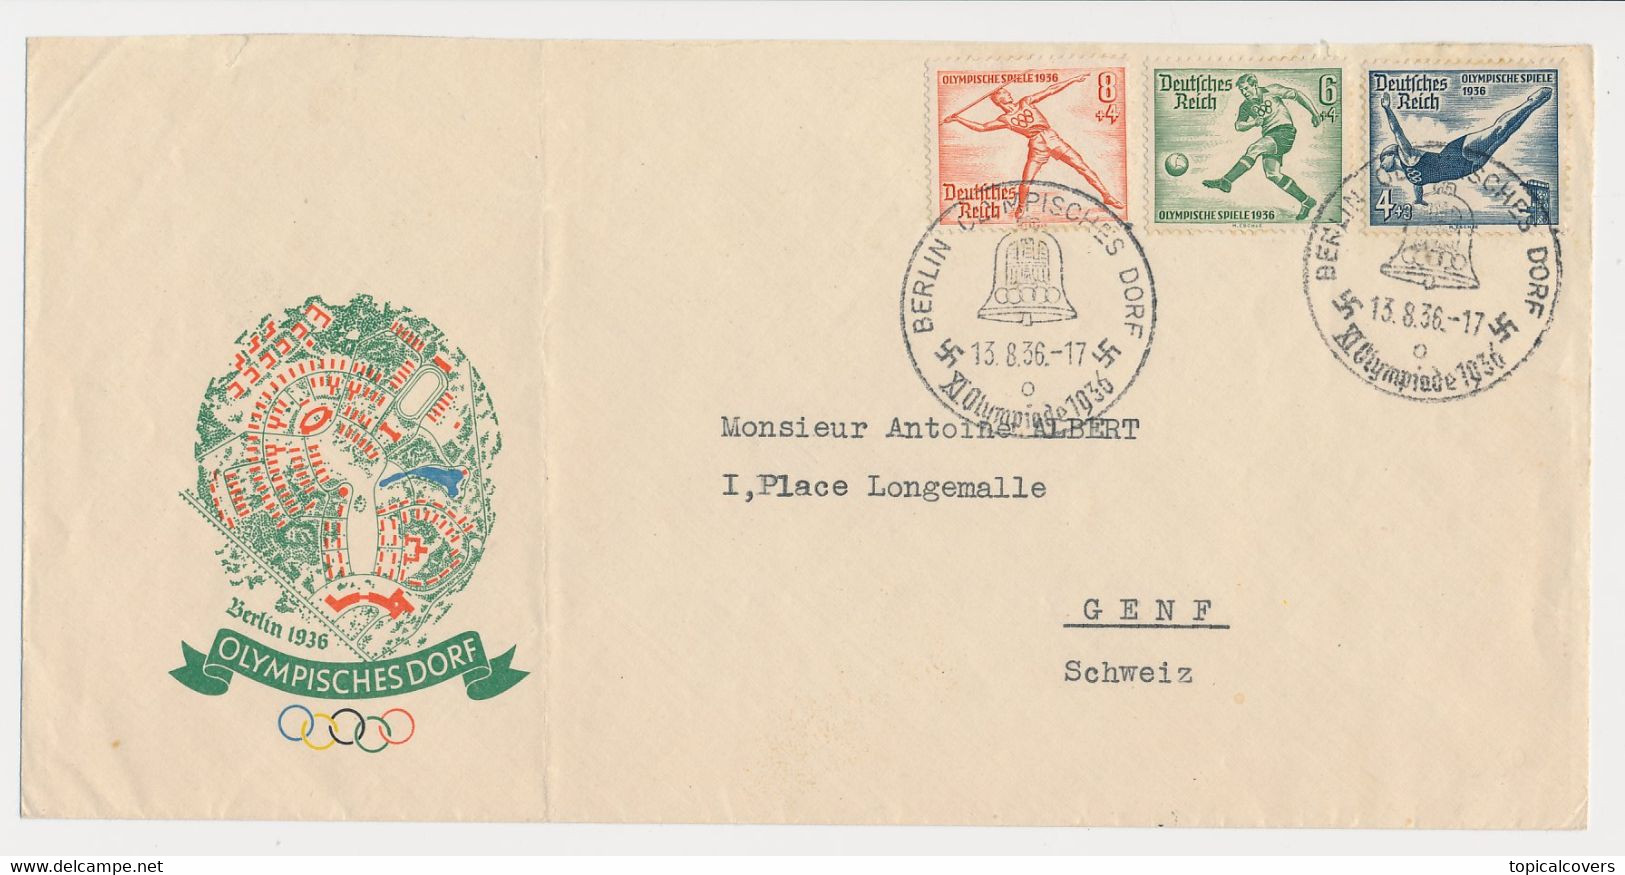 Illustrated Cover / Postmark / Stamps  Olympic Village Olympic Games Berlin 1936 - Ete 1936: Berlin